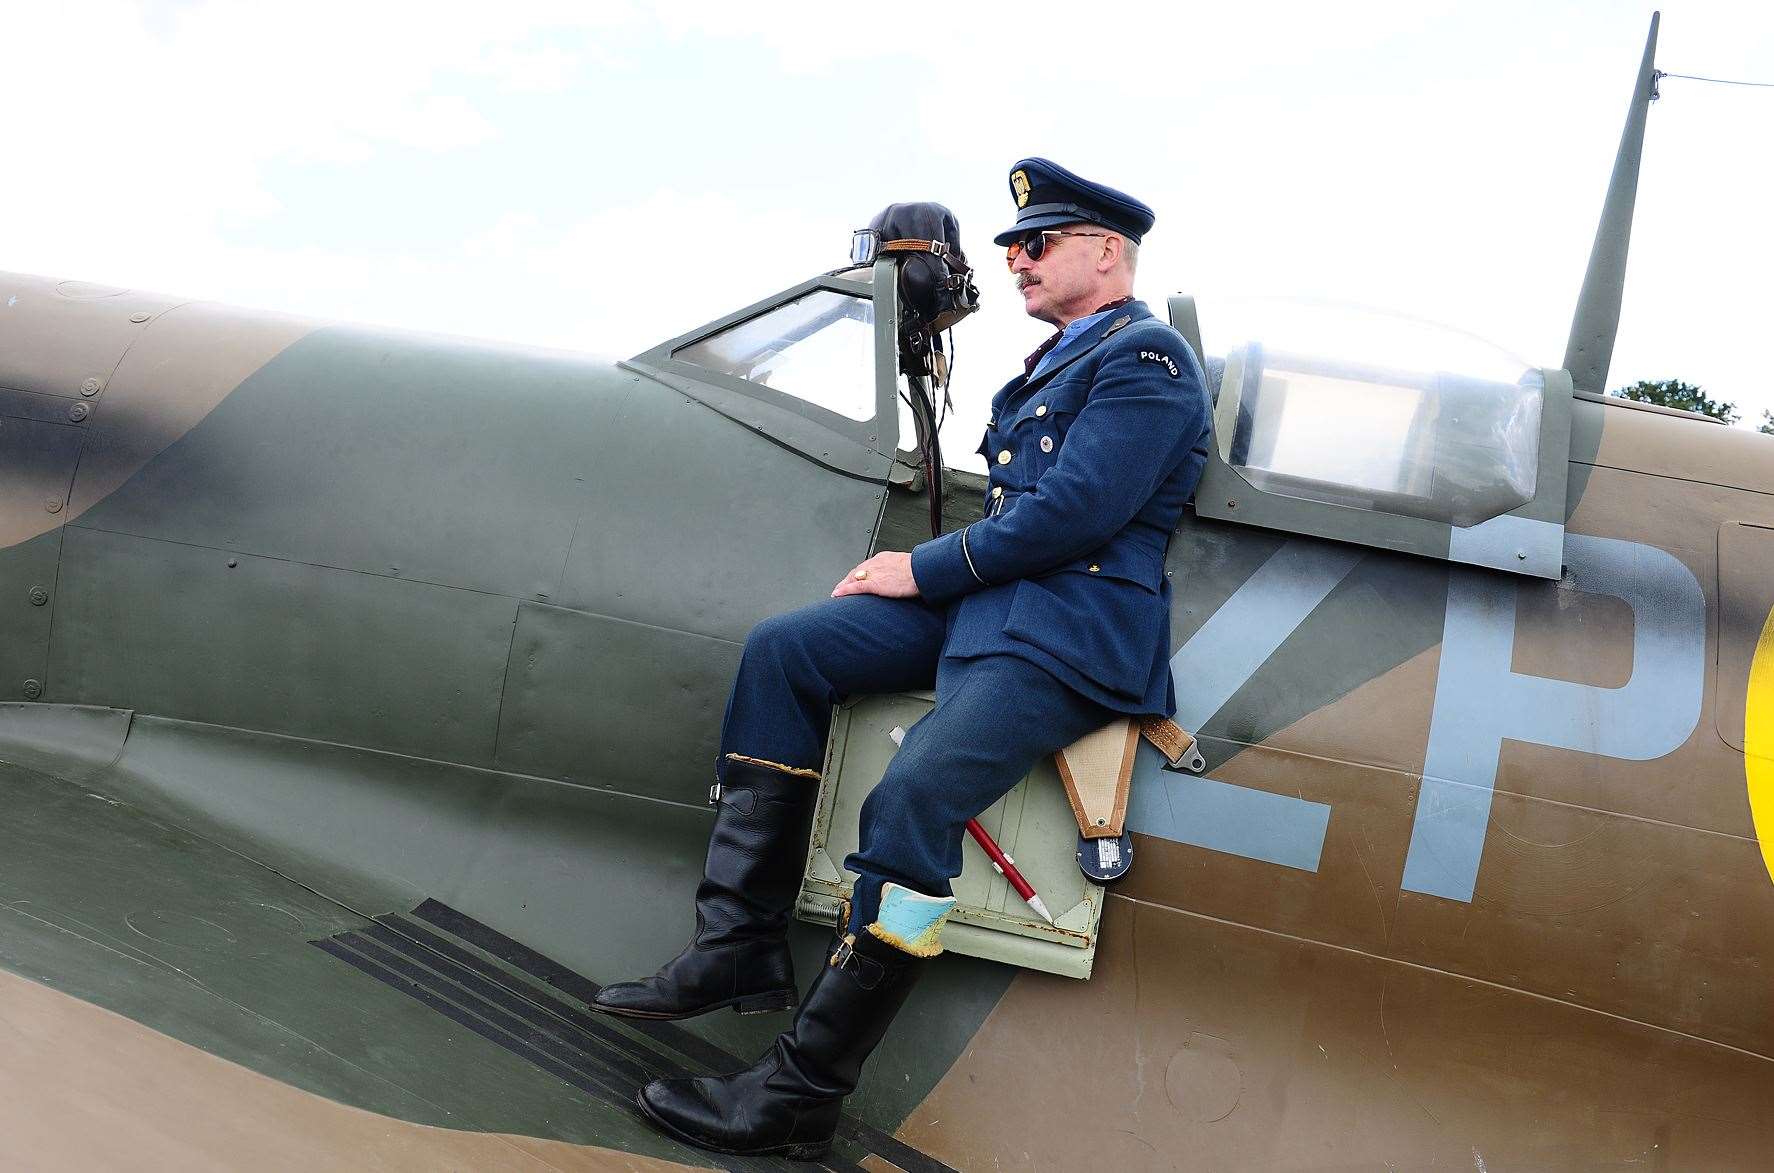 Find out fascinating facts about Britain's wartime history at the Combined Ops Military and Air Show at the Headcorn Aerodrome. Picture: Big Plan Group